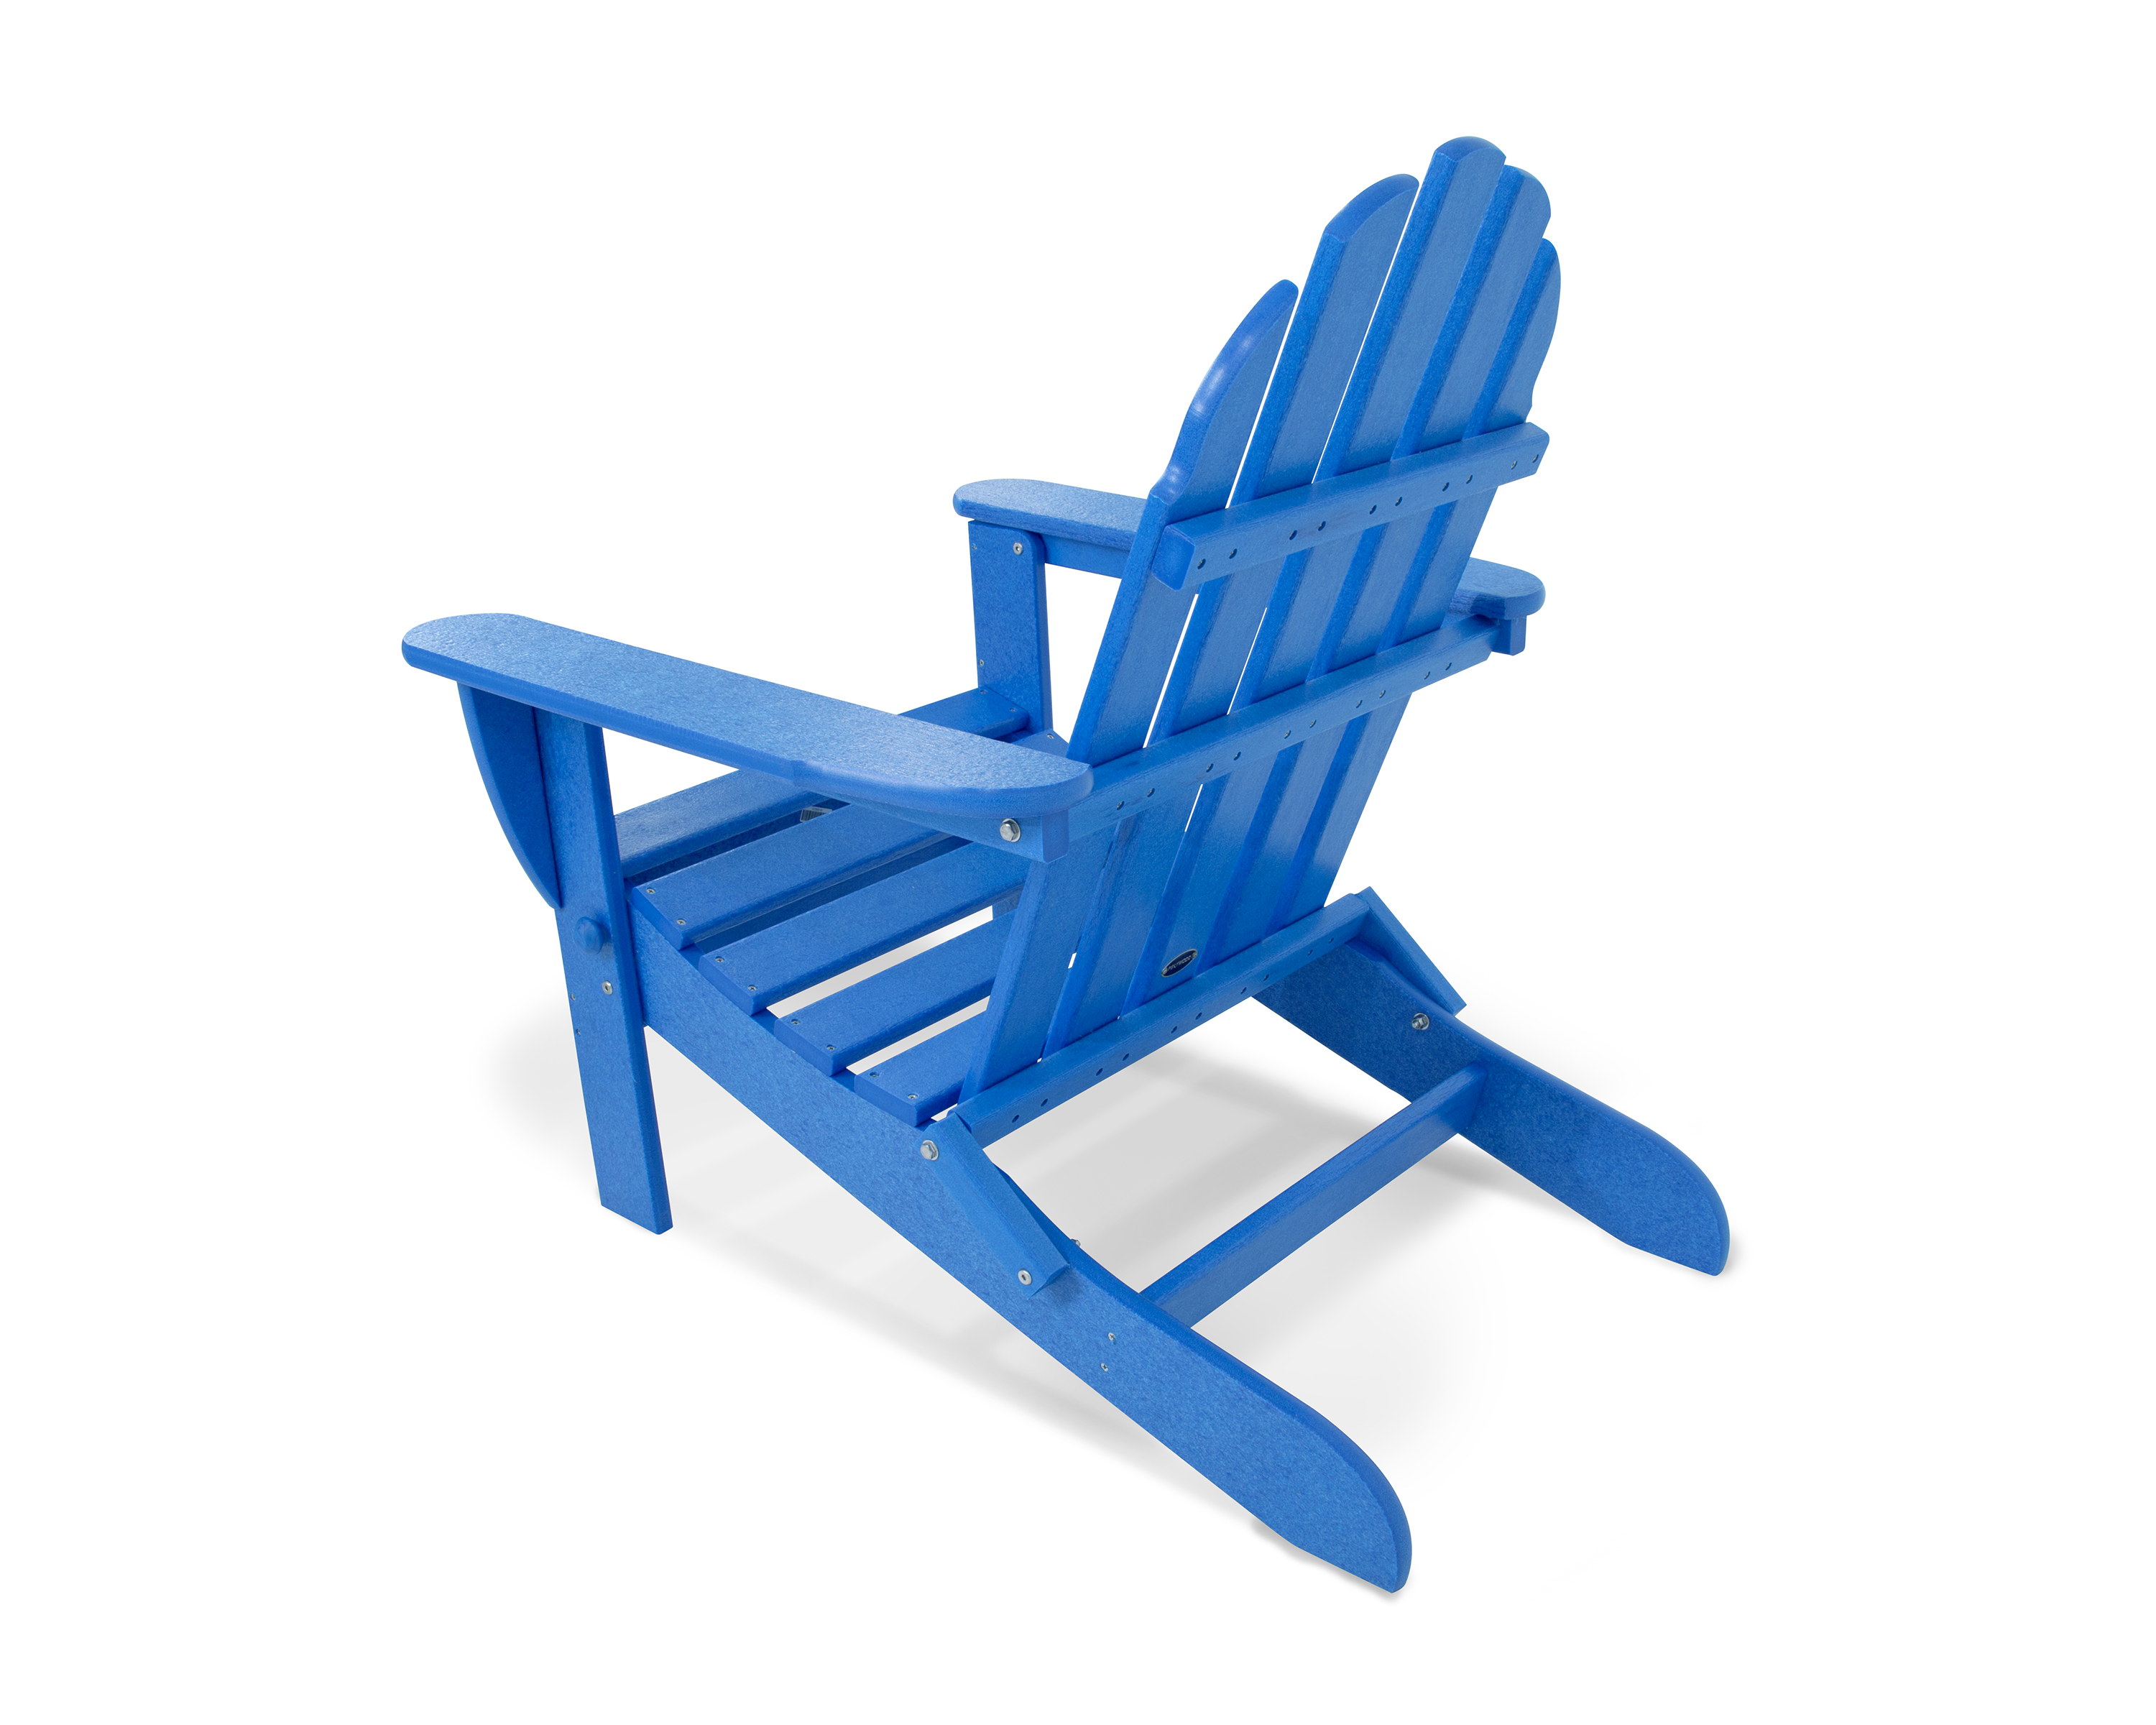 classic folding adirondack chair in pacific blue thumbnail image